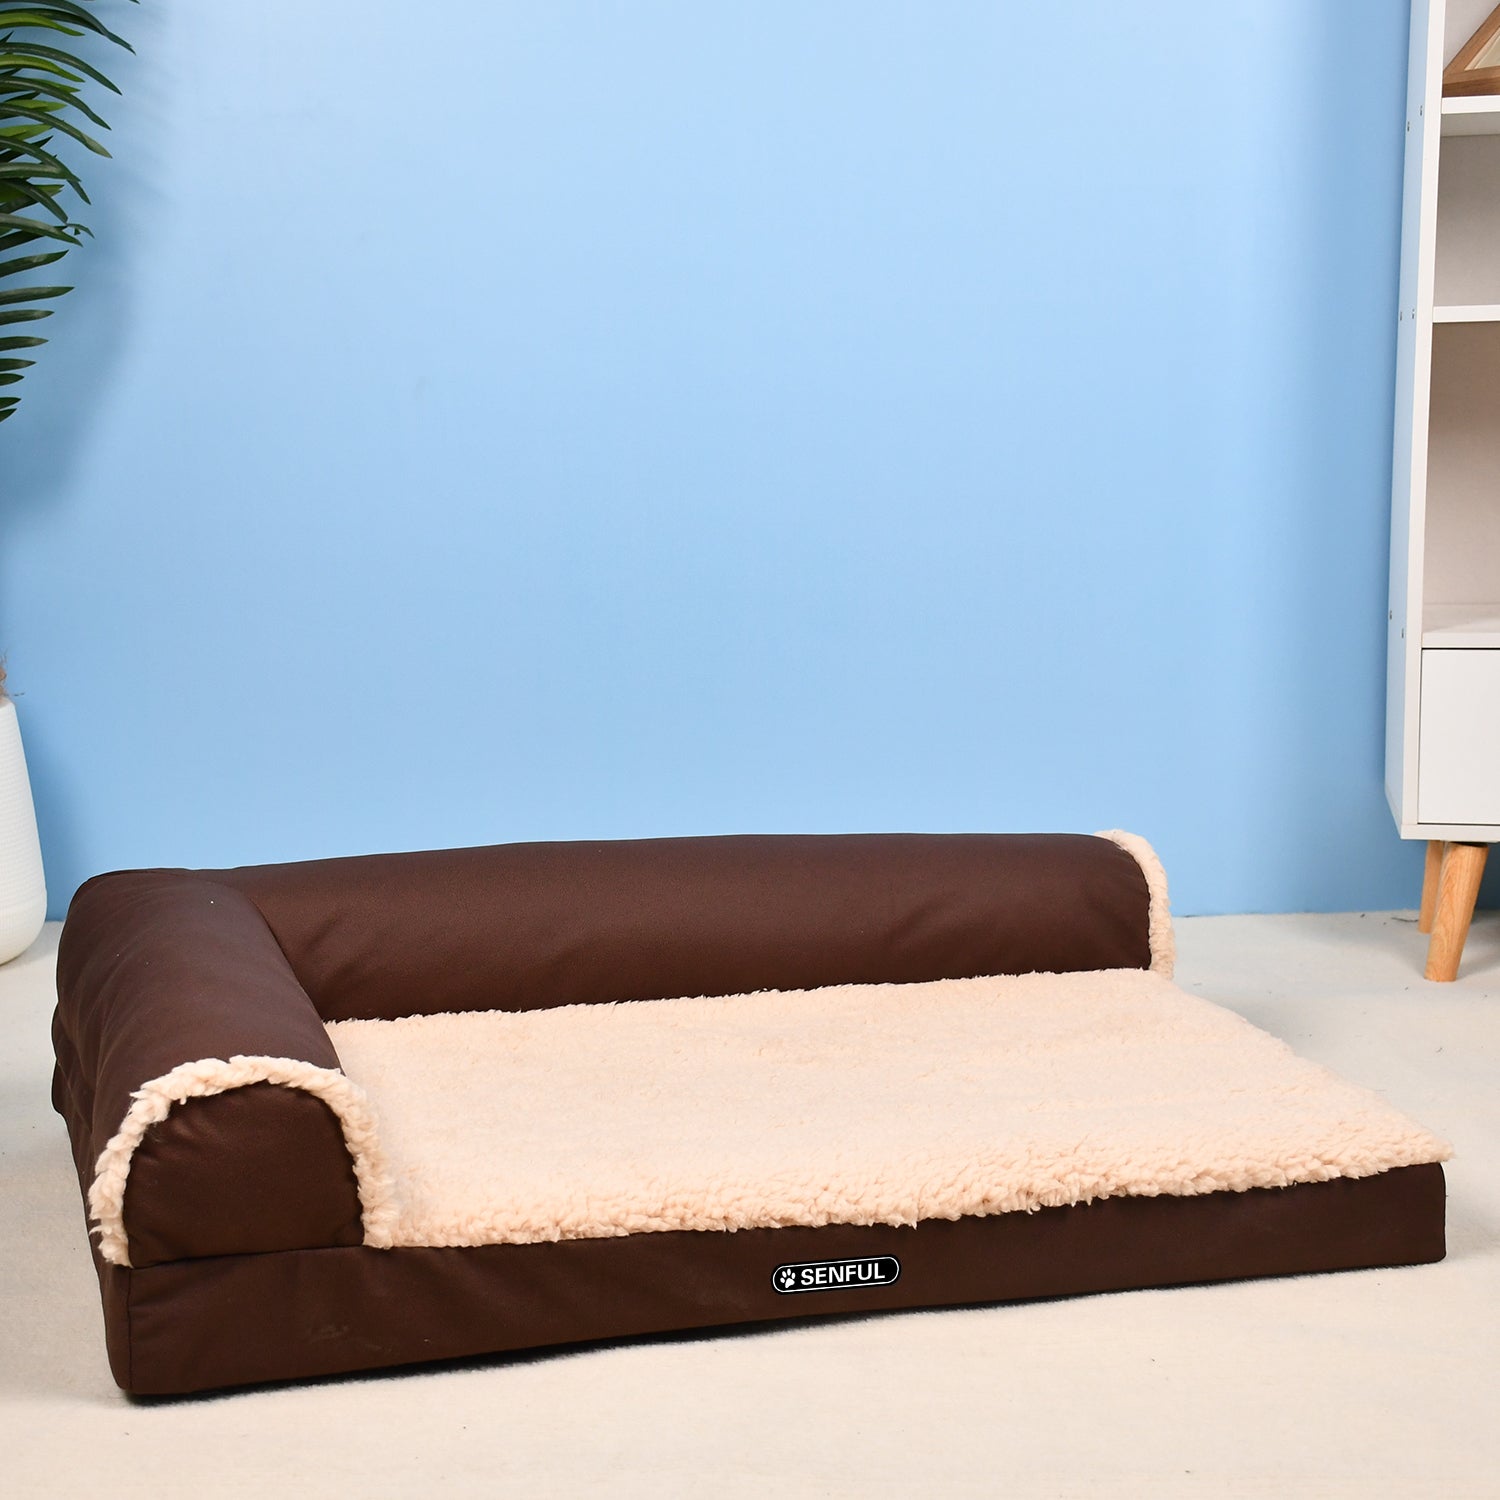 SENFUL Dog Beds for Household, L-Shaped Comfortable Bed for Medium & Large Dogs, Coffee, 41''